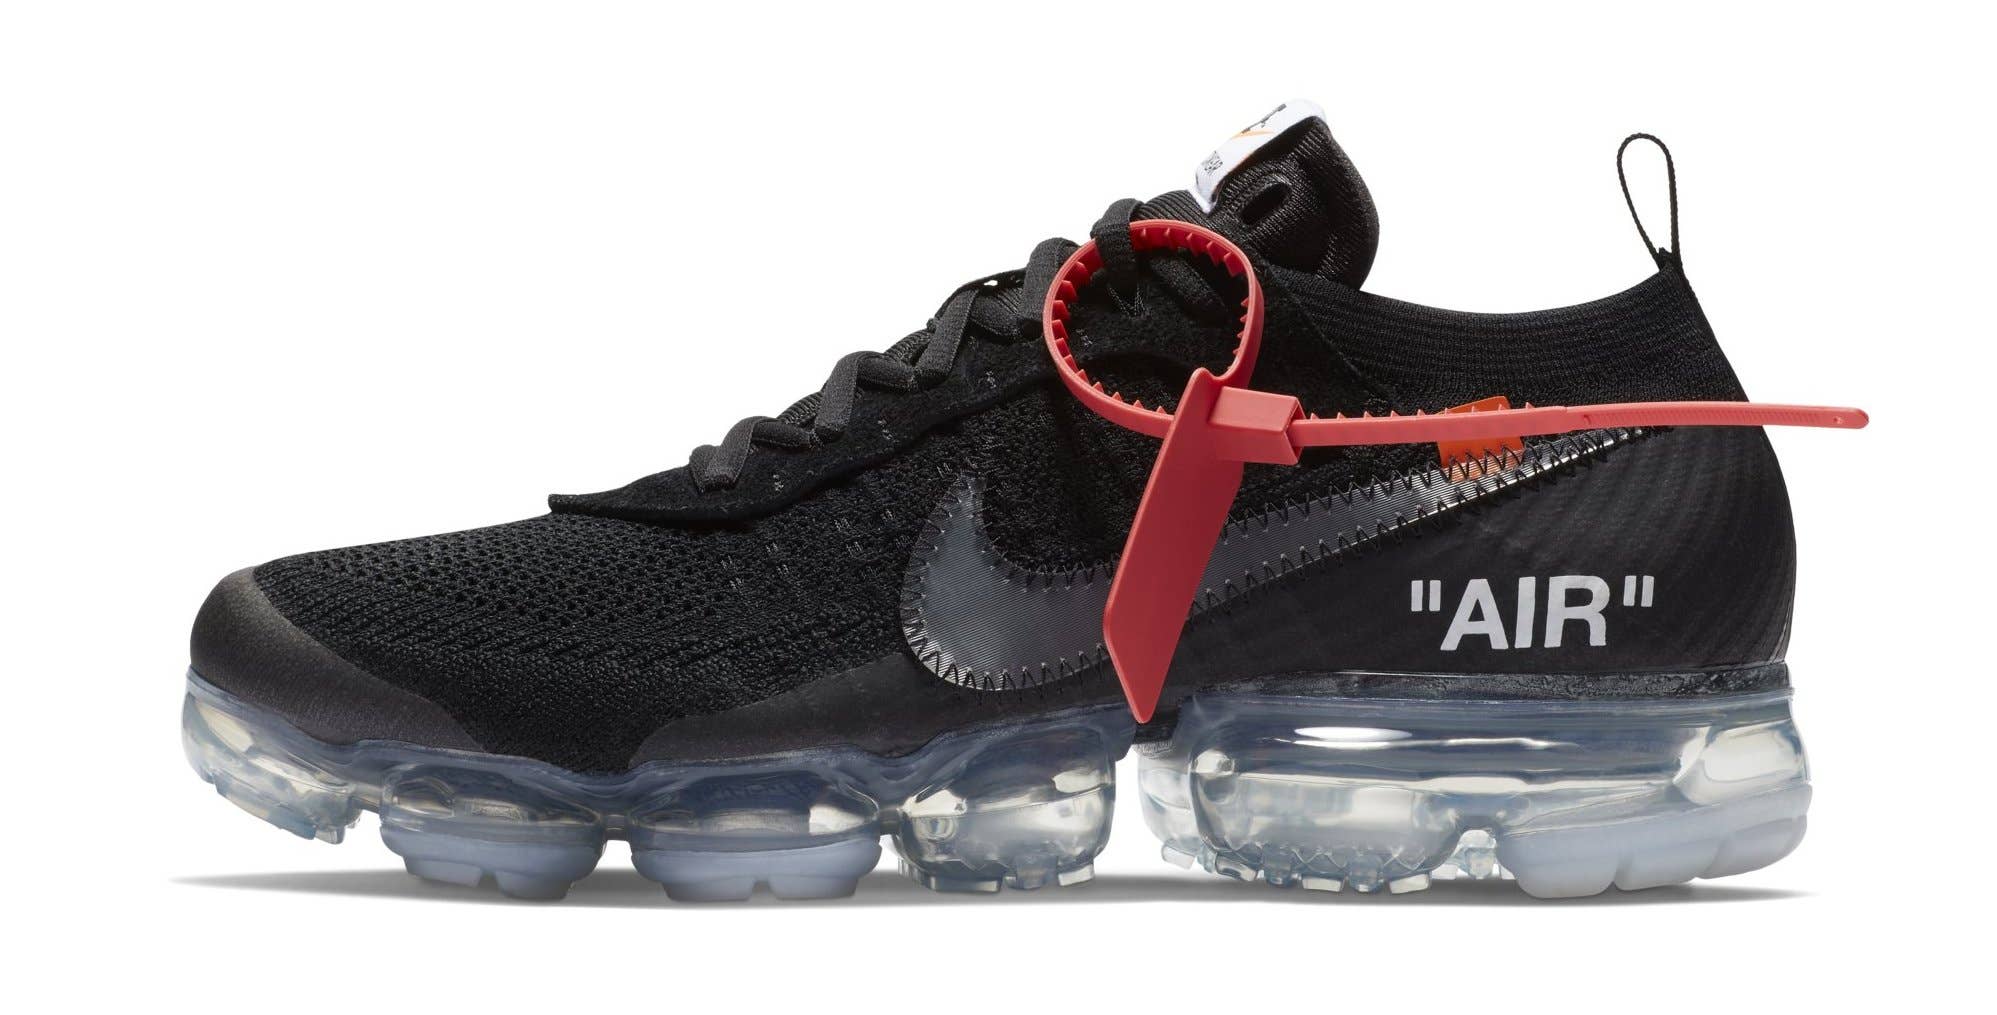 Off White x Nike Air VaporMax 'Black' AA3831 002 (Lateral)